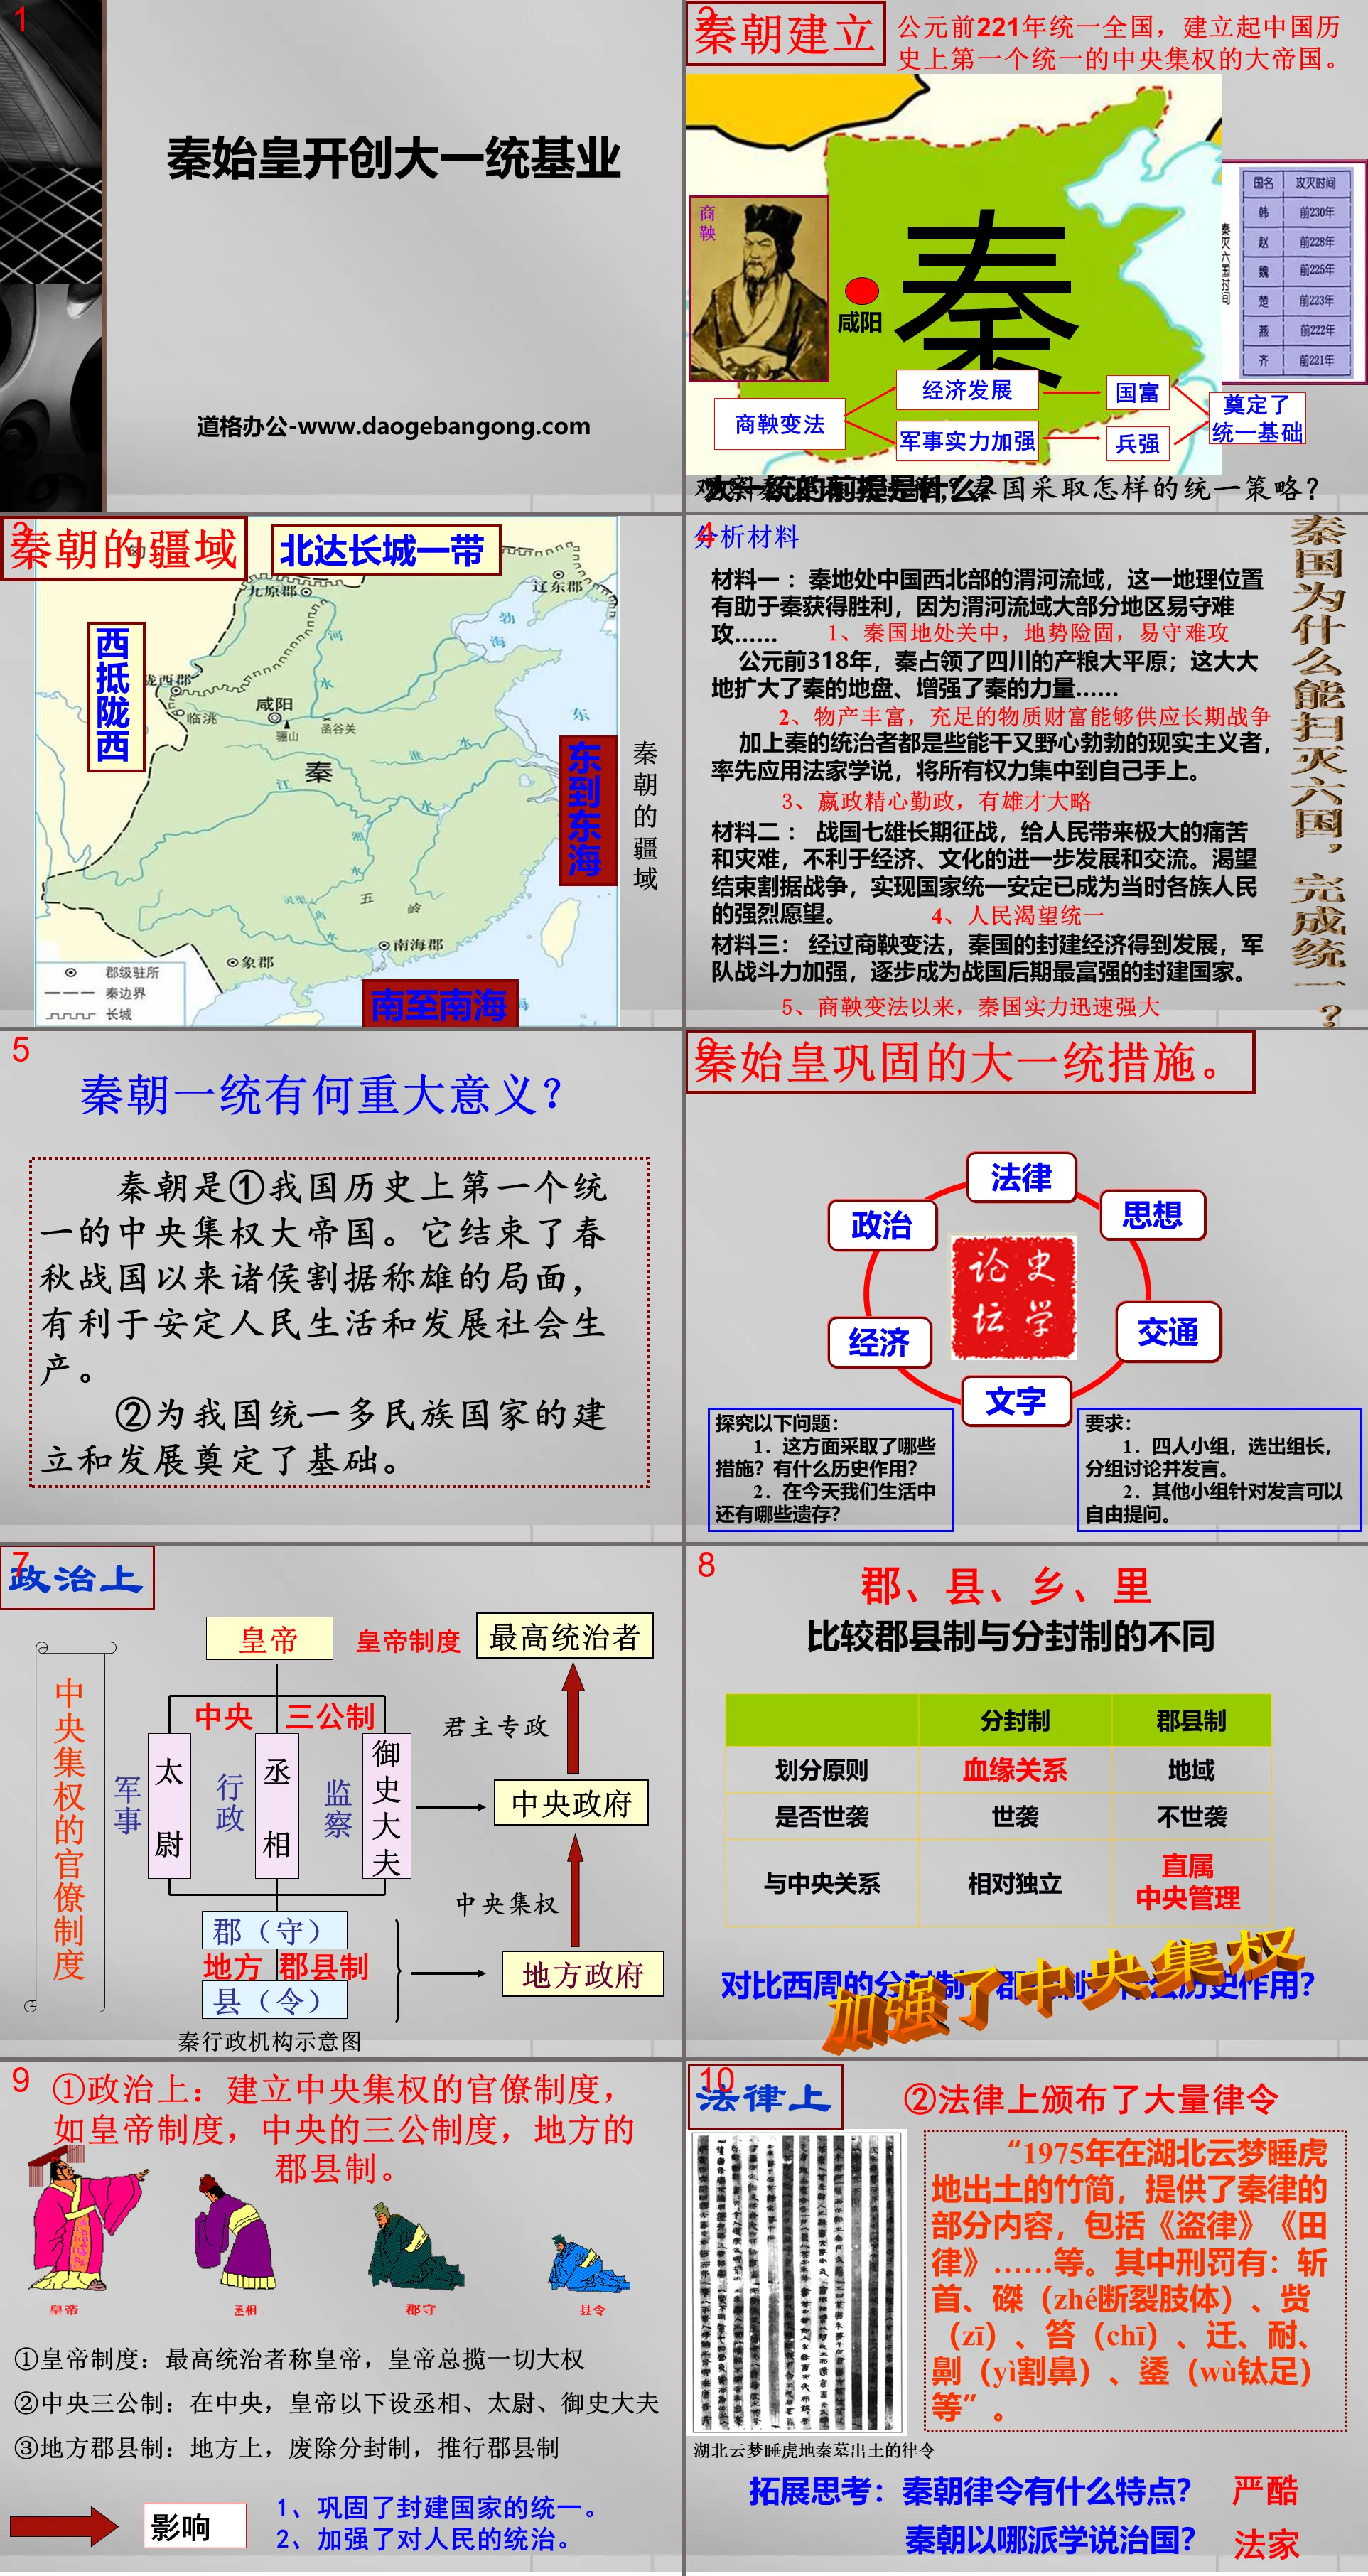 "Qin Shihuang Created the Foundation of Unification" PPT on the establishment and development of a unified multi-ethnic country